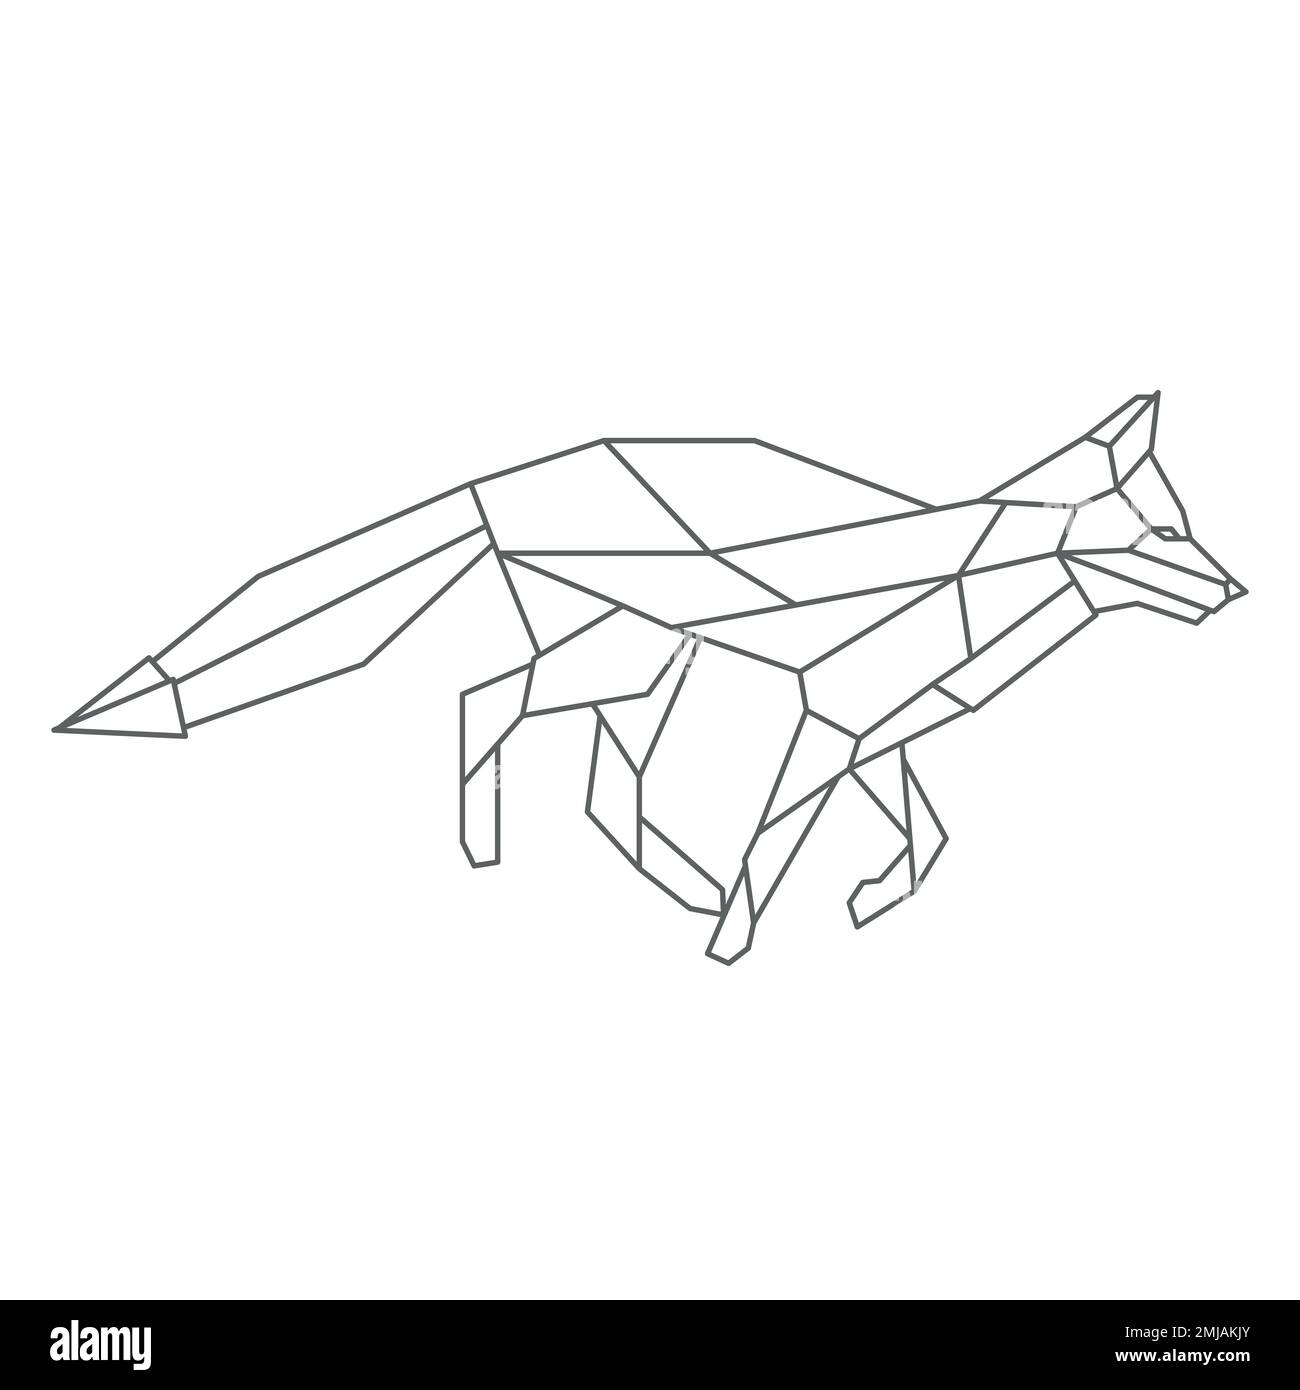 The fox runs to hunt. Geometric linear wild animal. Abstract minimalistic illustration. Stylish modern clipart for design of branded products. Isolate Stock Vector